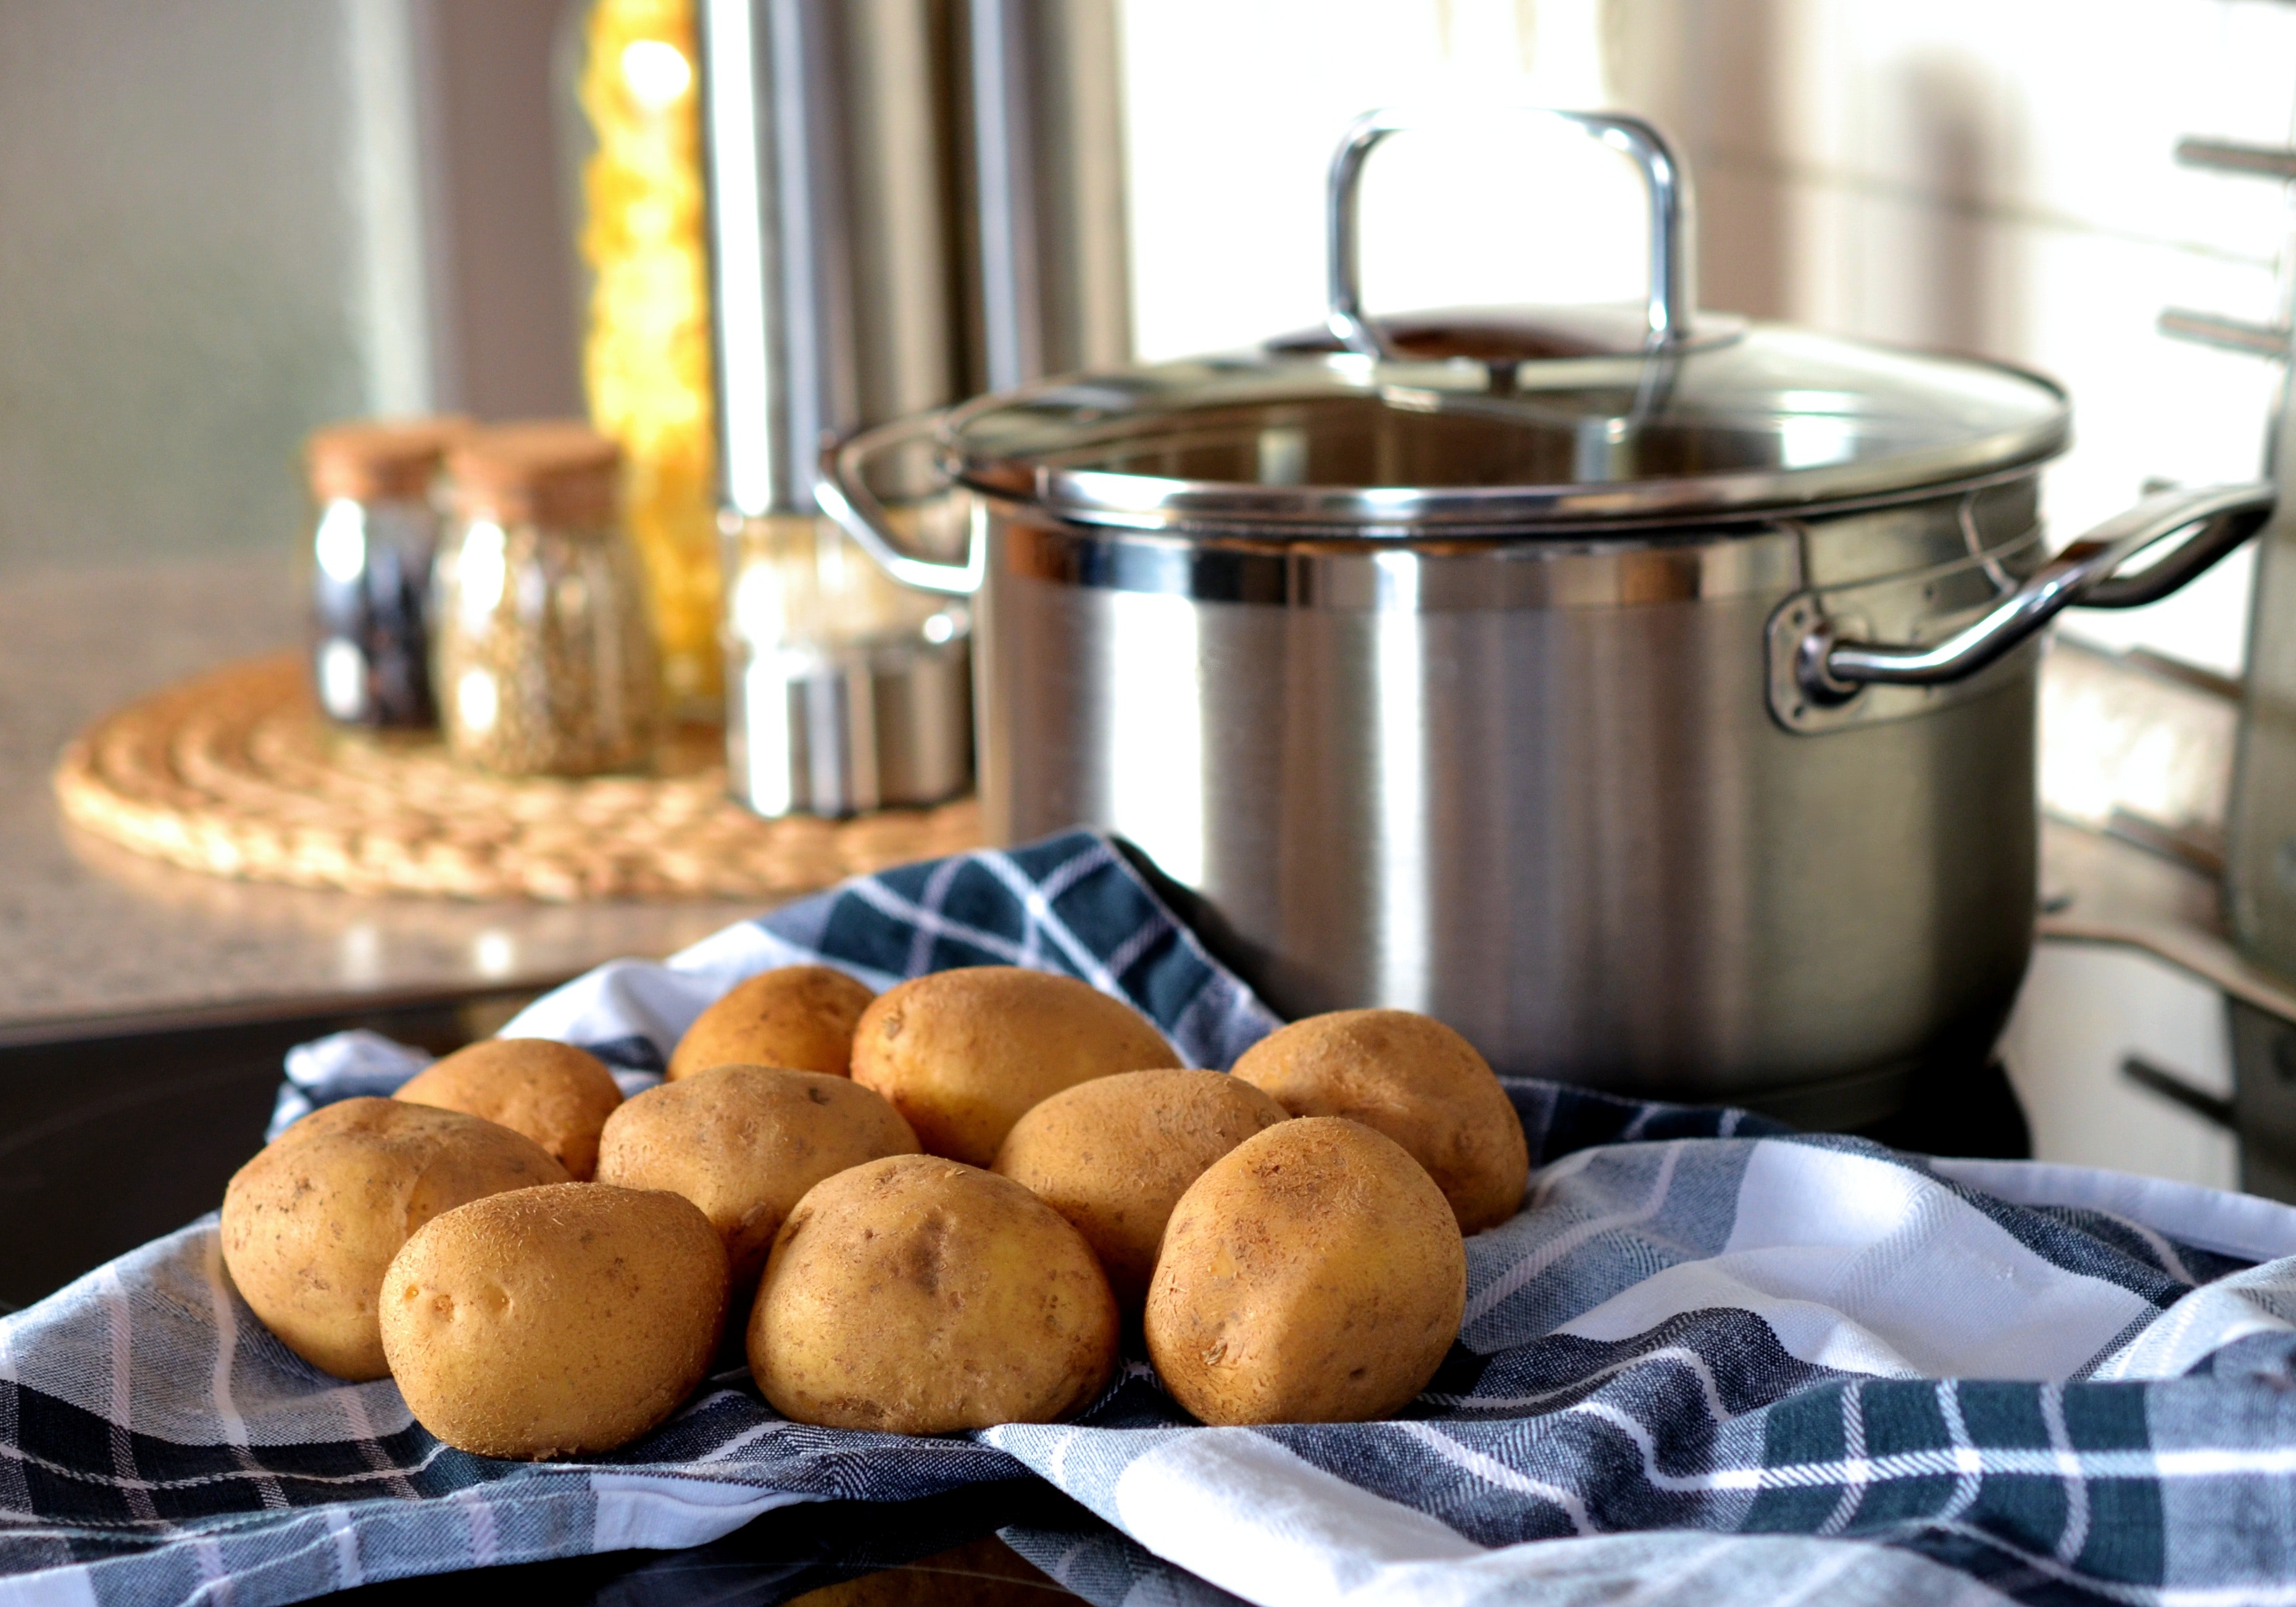 Potatoes beside stainless steel cooking pot photo